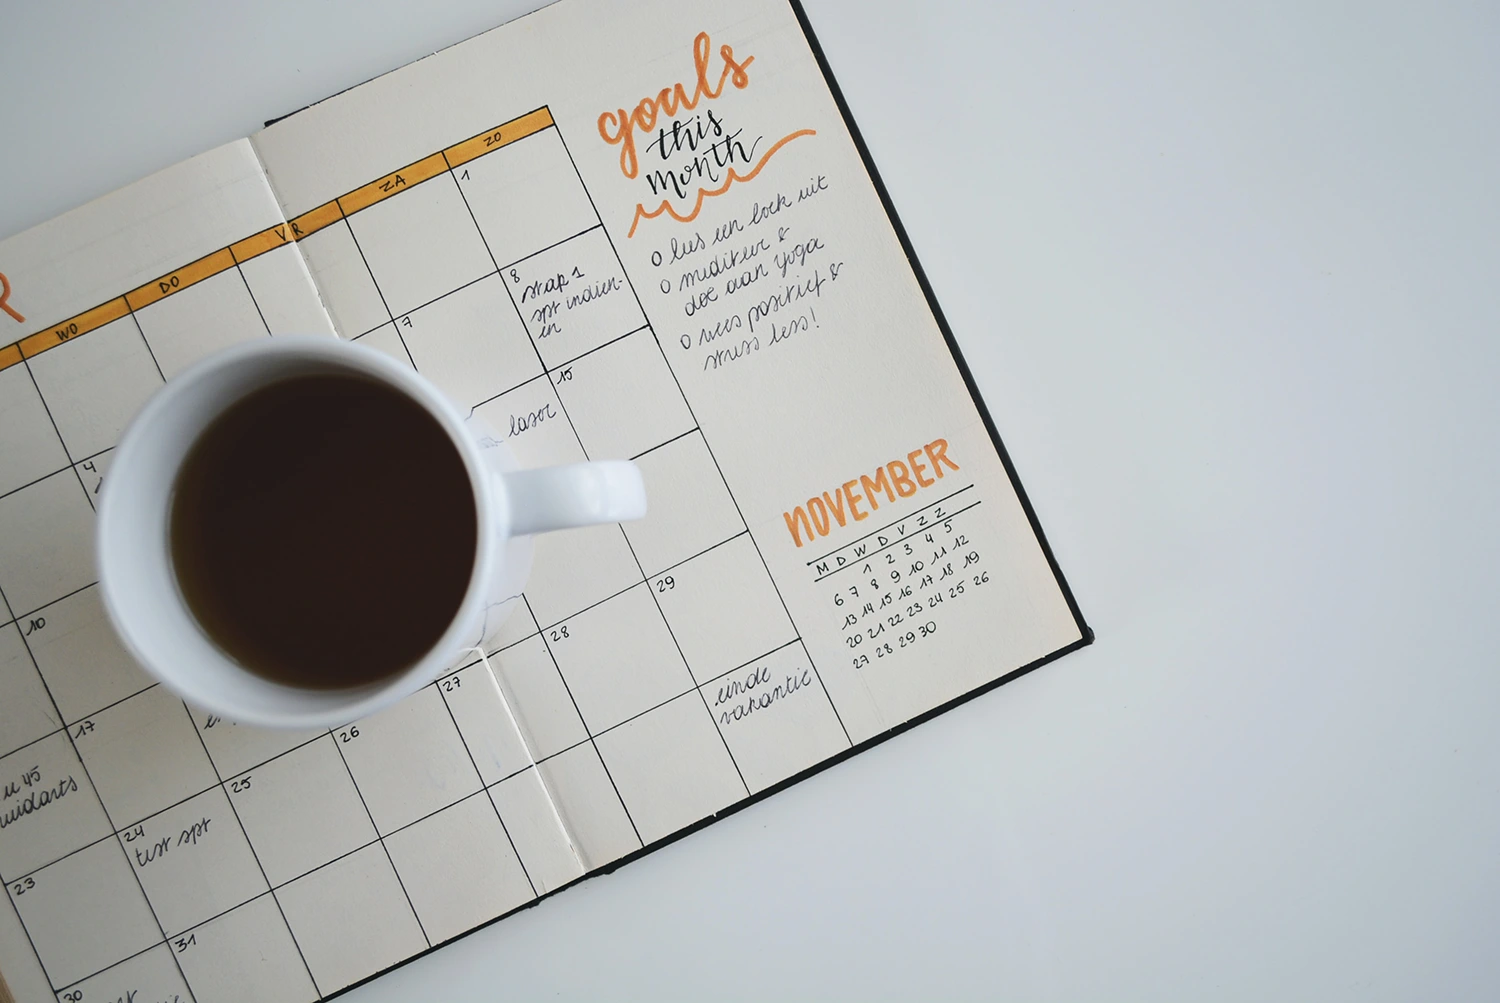 A calendar coupled with a cup of coffee represents restaurant marketing.